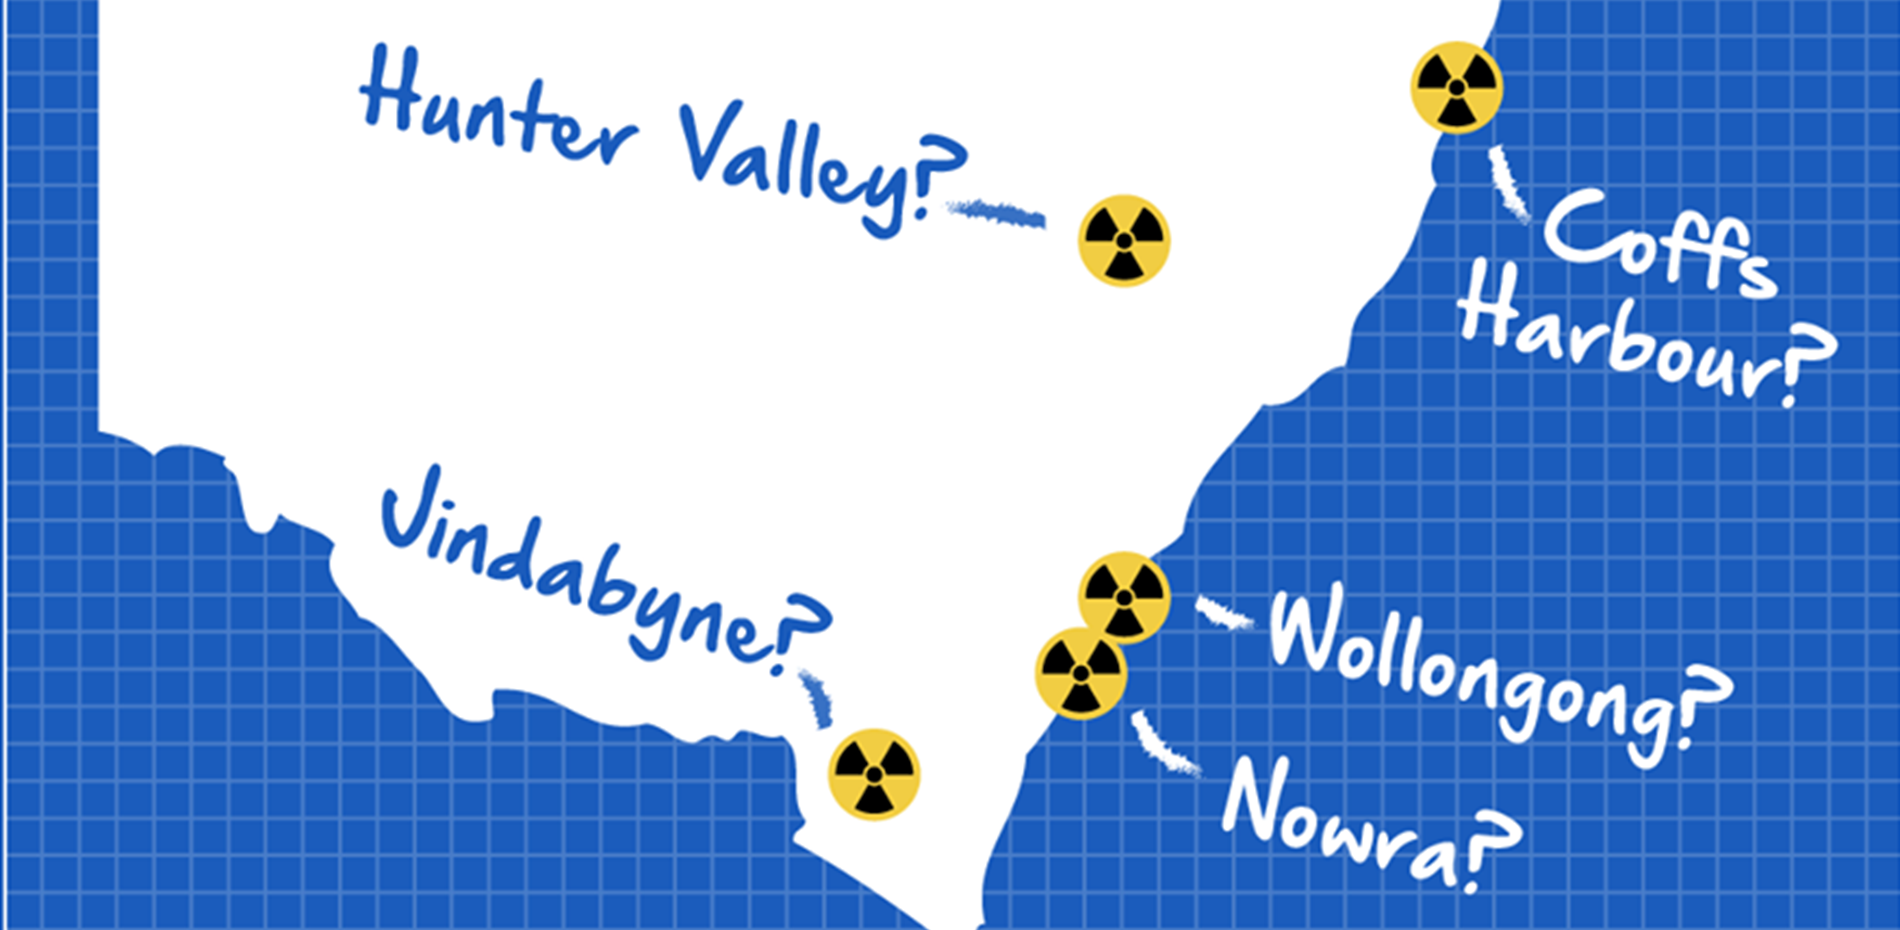 Media release: Public hearing on nuclear energy in Sydney today Main Image